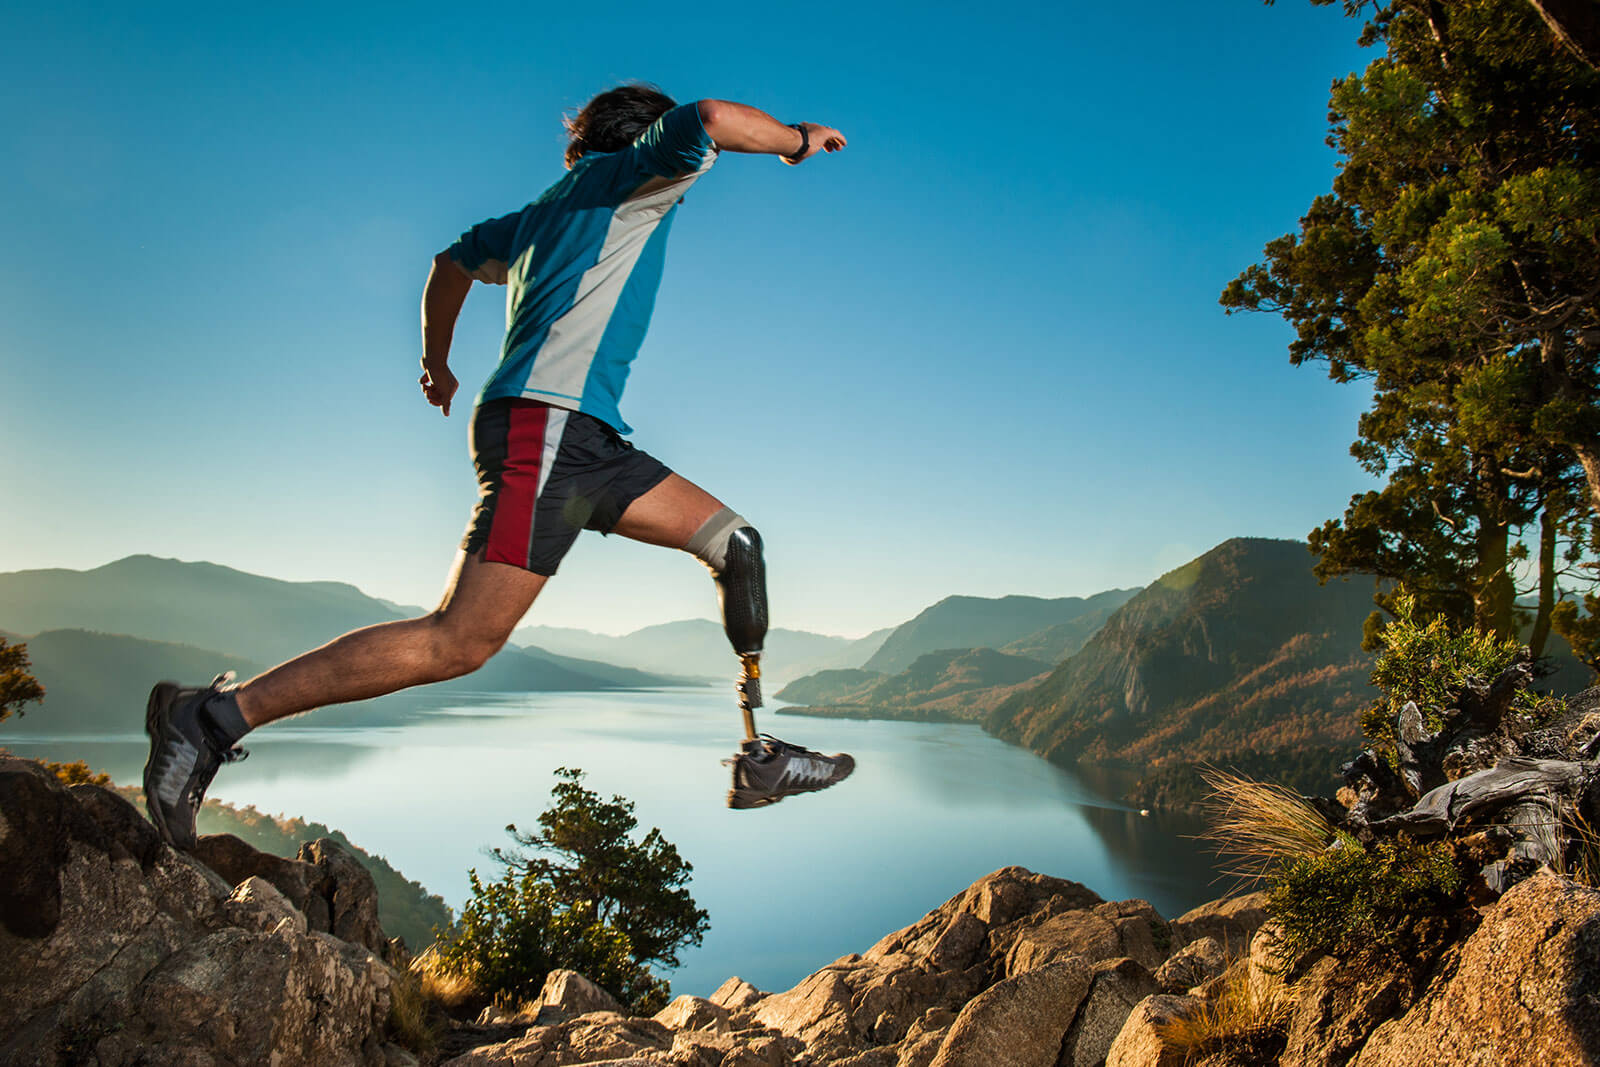 Image of man with prosthetic leg jumping on a mountain with a lake in the background